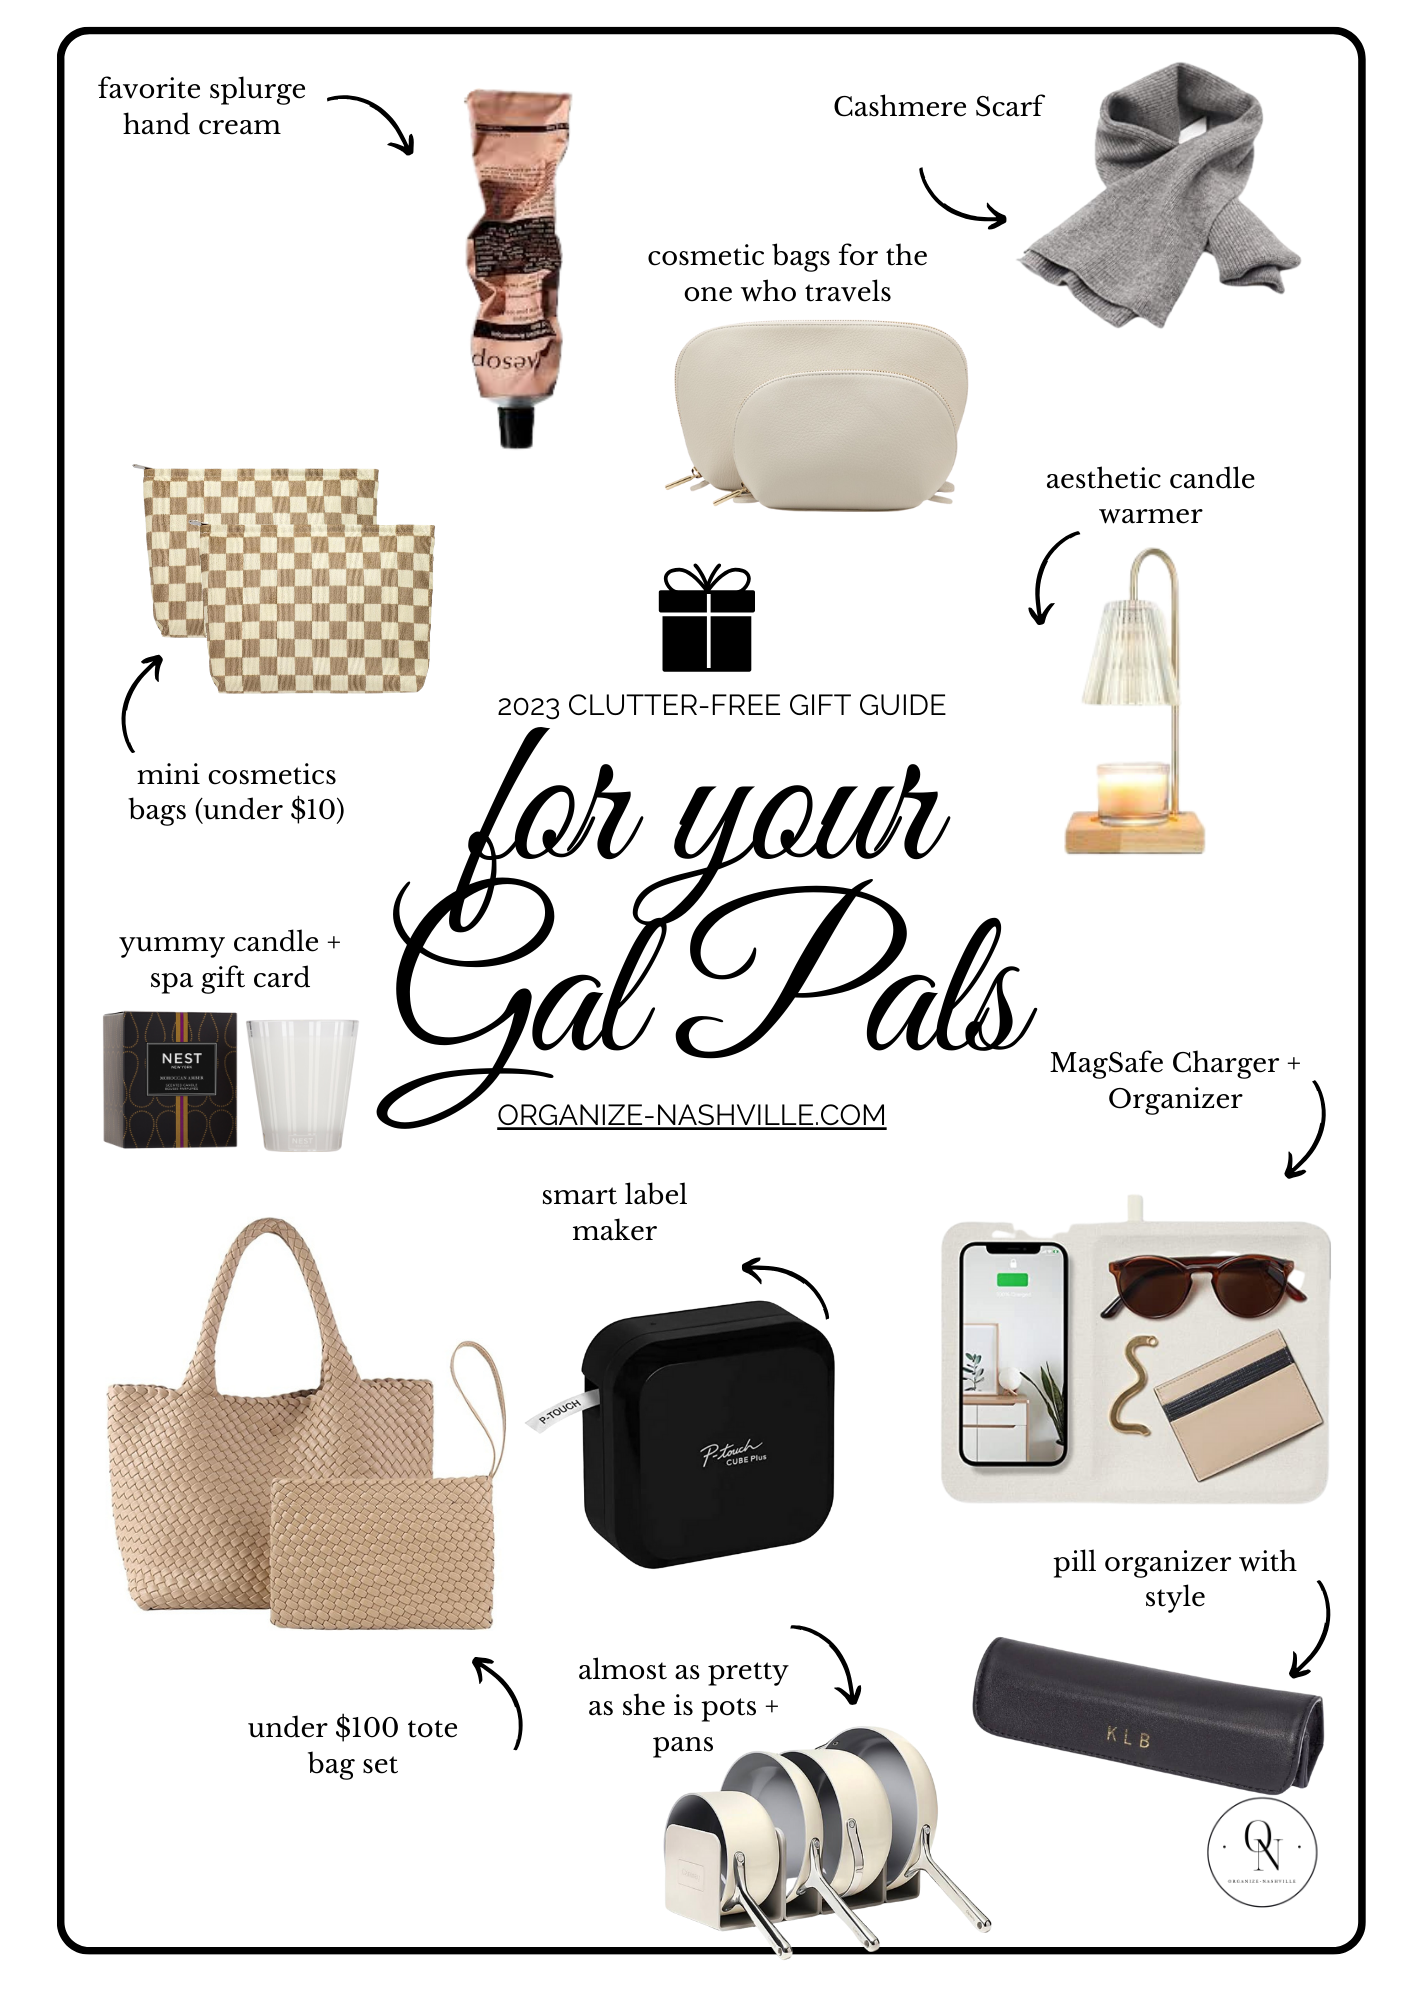 2021 Women's Gift Guide - Gift Guide For Her